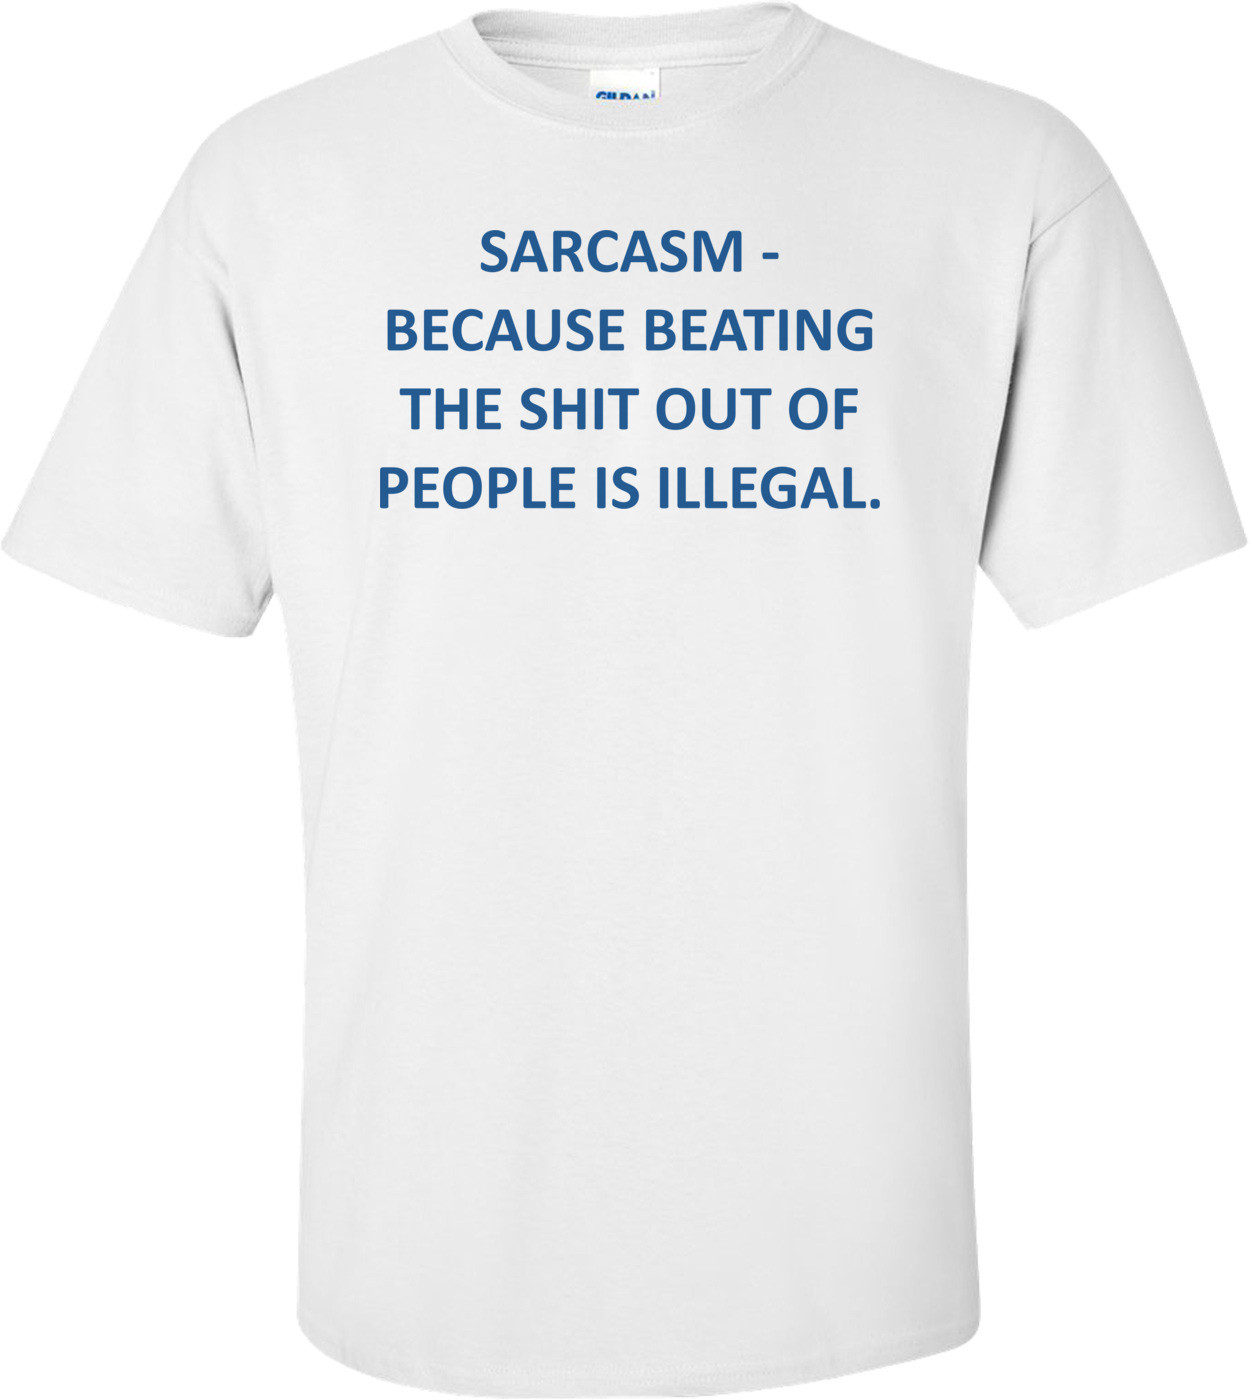 SARCASM - BECAUSE BEATING THE SHIT OUT OF PEOPLE IS ILLEGAL.